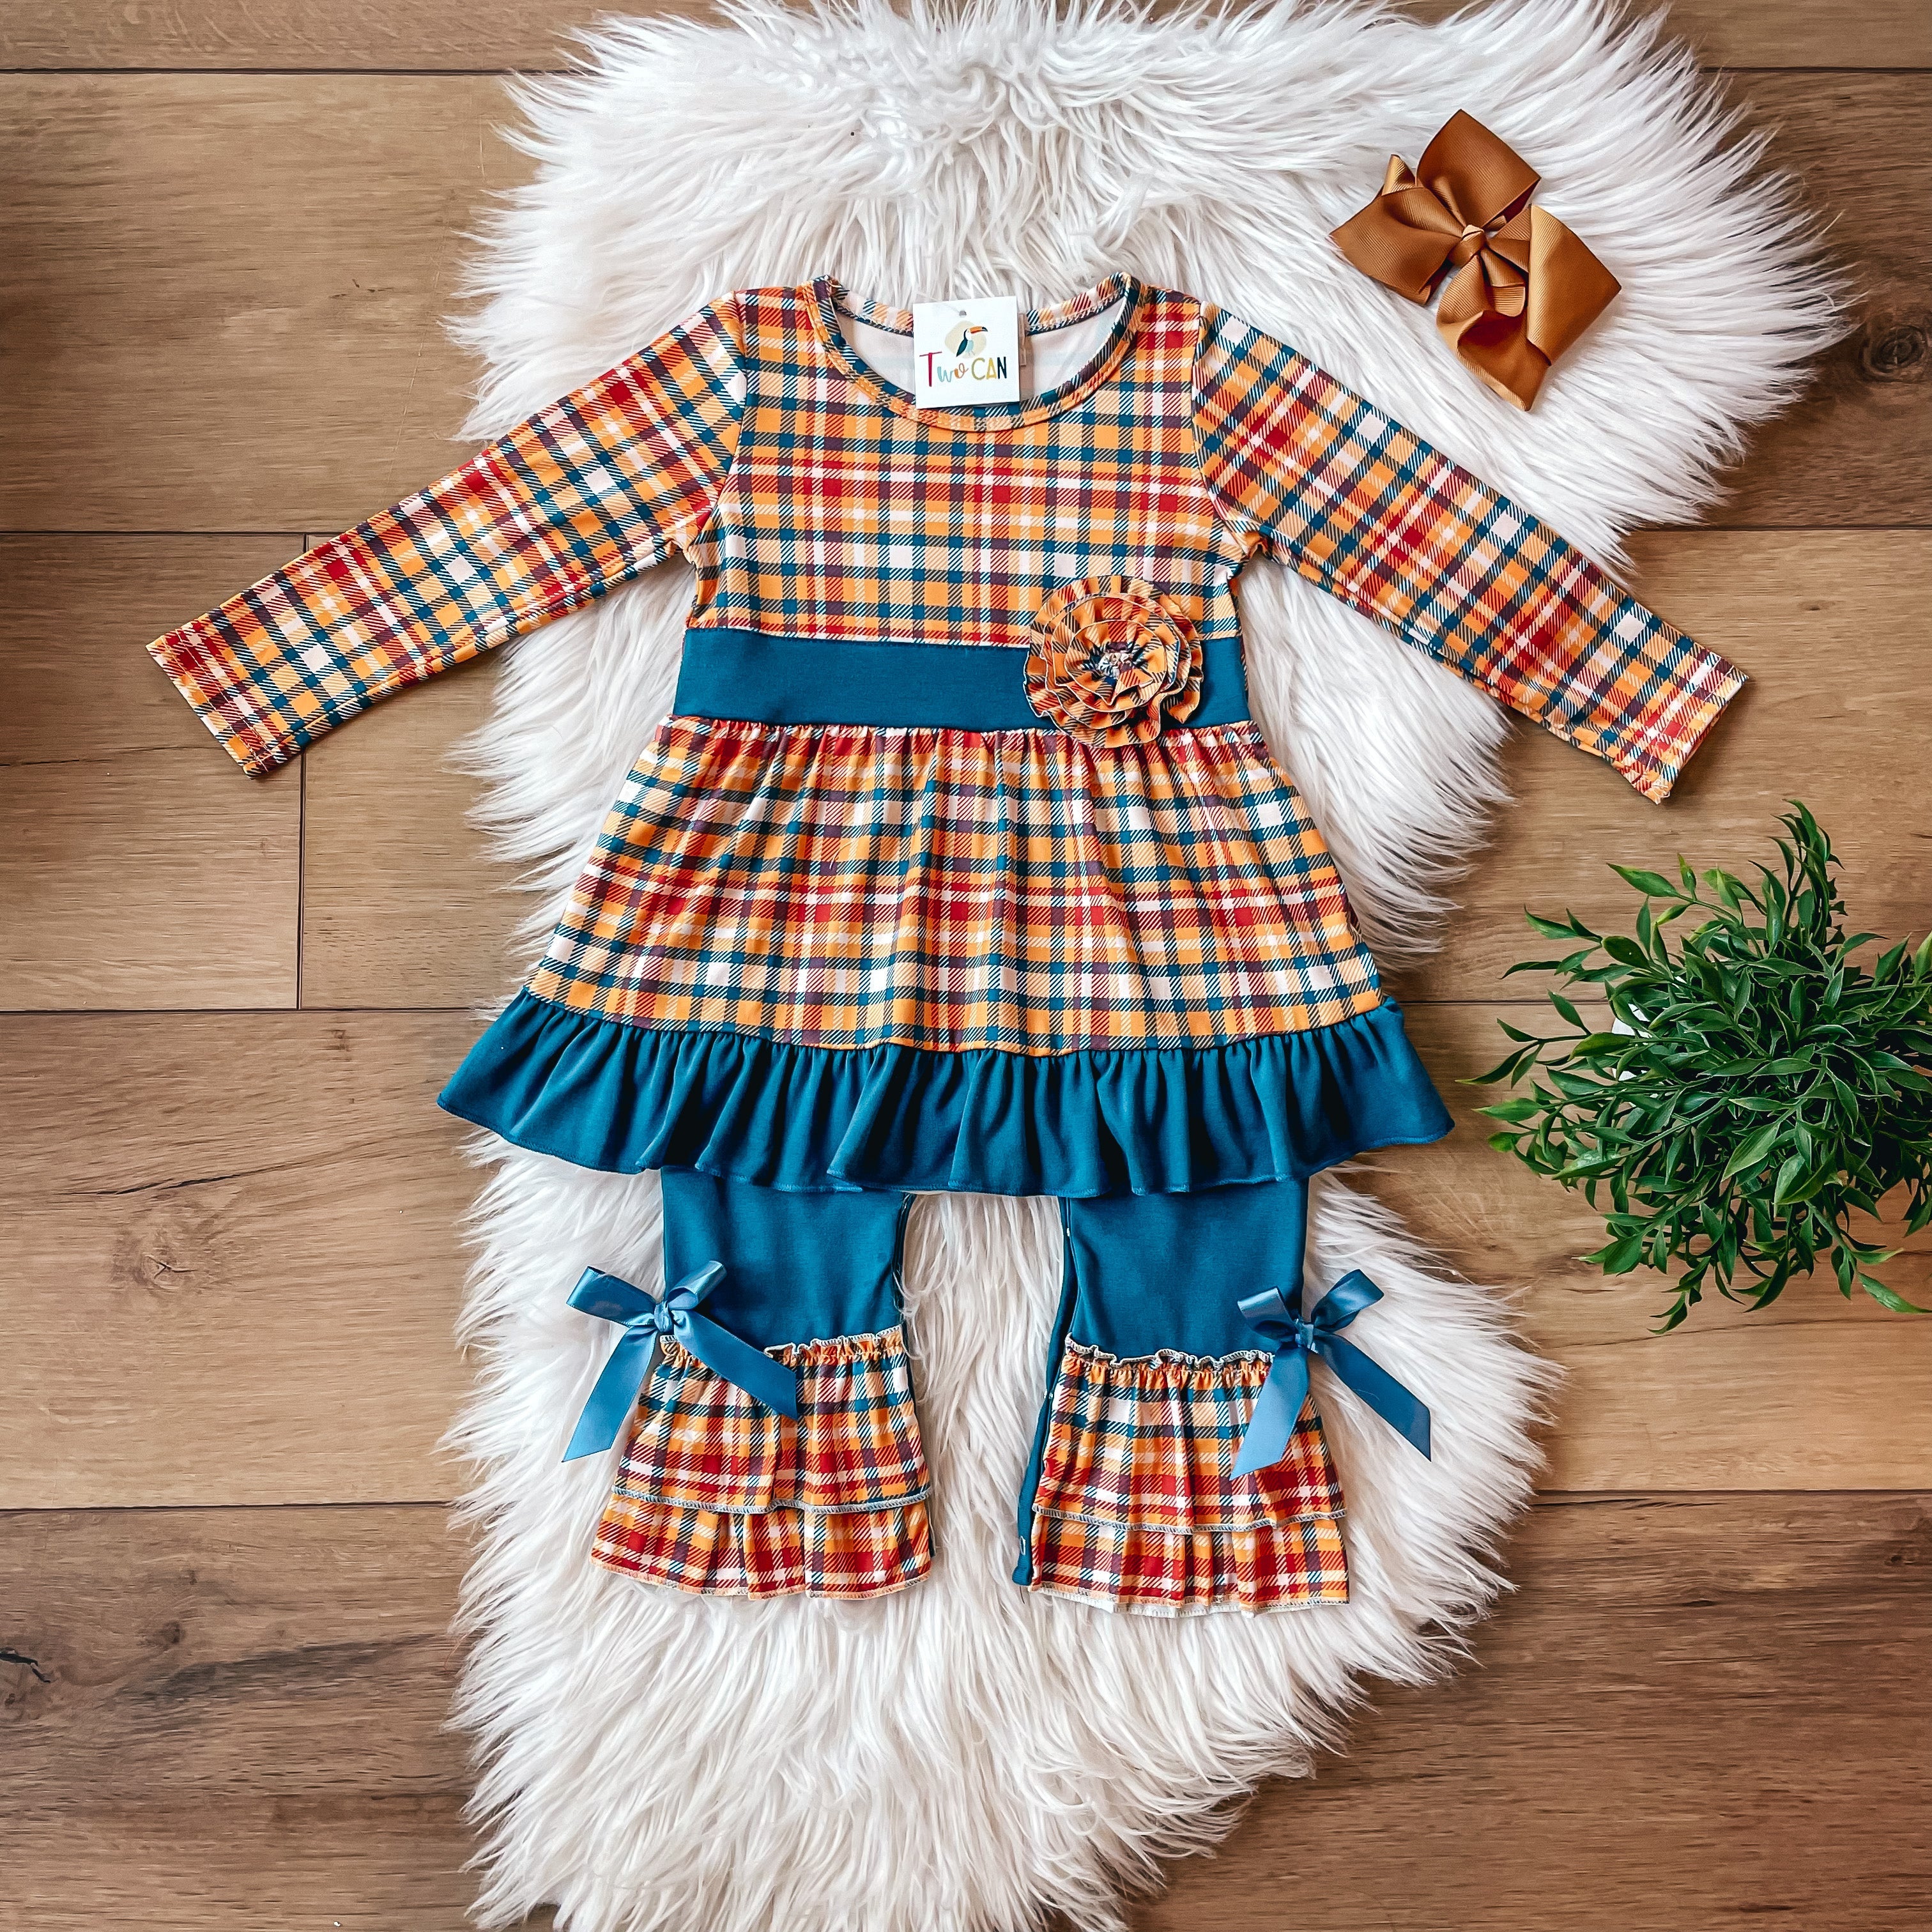 Blue & Mustard Plaid Baby Romper by Twocan **PREORDER**